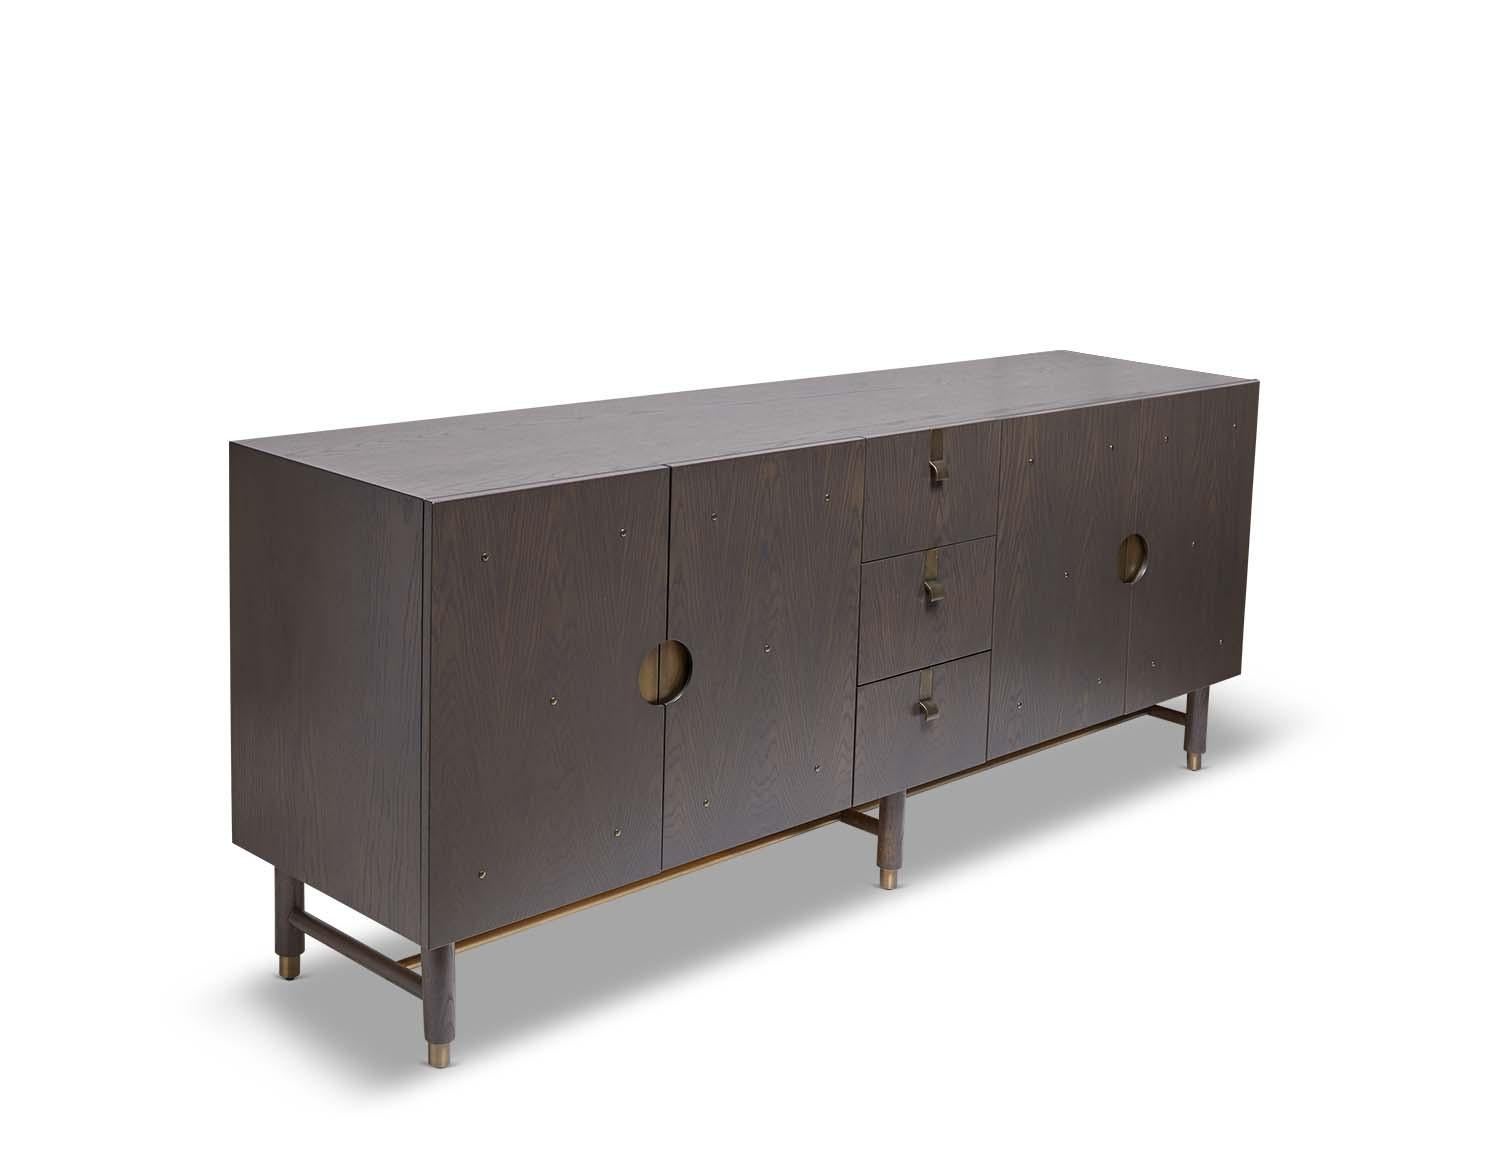 The Niguel cabinet by Lawson-Fenning has a brass stretcher on the base, brass inlaid details on the doors and insert brass handles. The interior is lacquered. Shown here in dark grey washed oak.

The Lawson-Fenning Collection is designed and